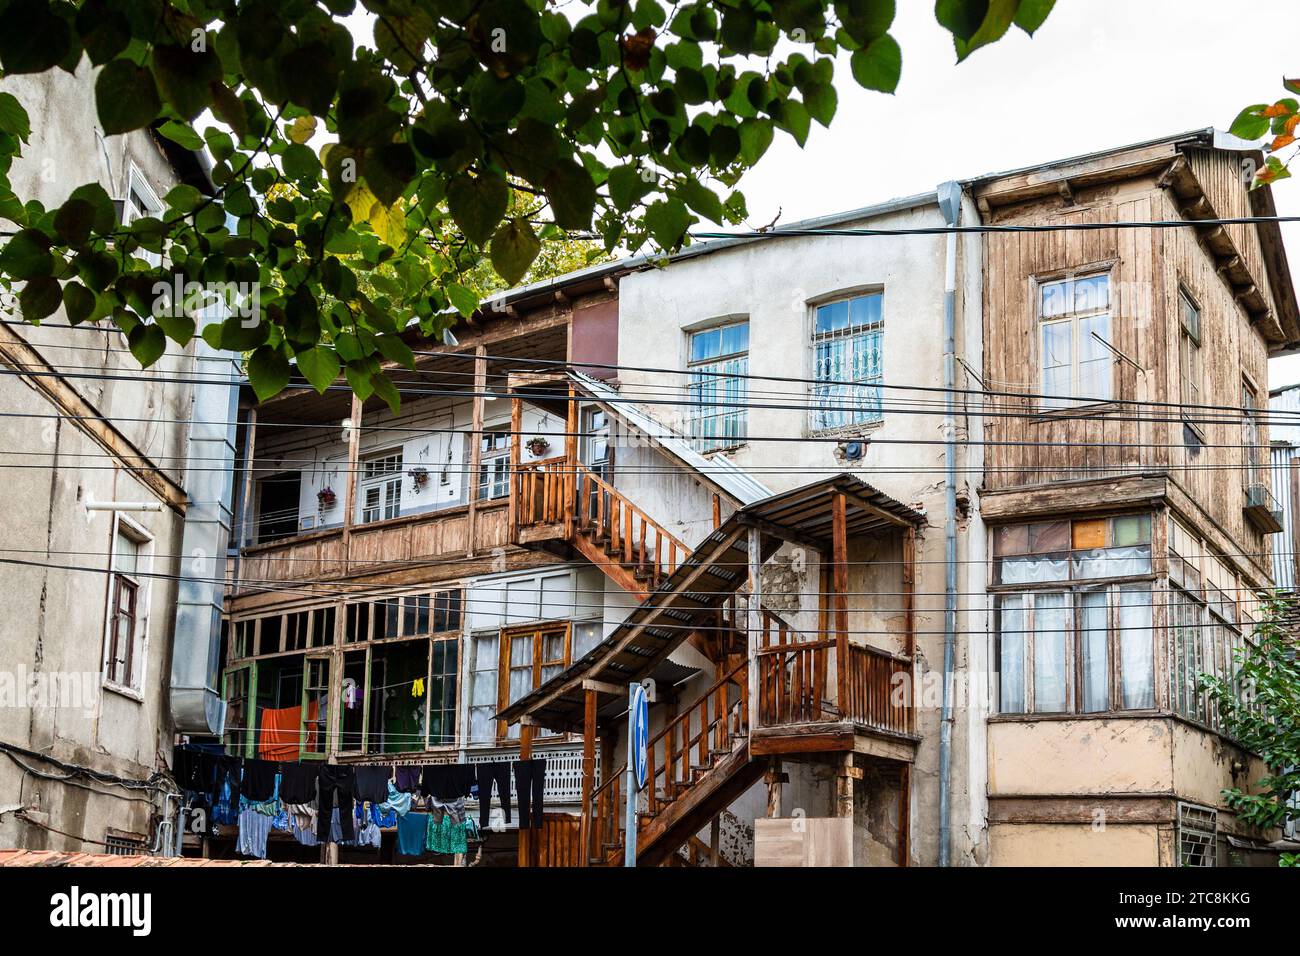 travel to Georgia - old house with balconies connected by external wooden stairs in Tbilisi city on autumn day Stock Photo